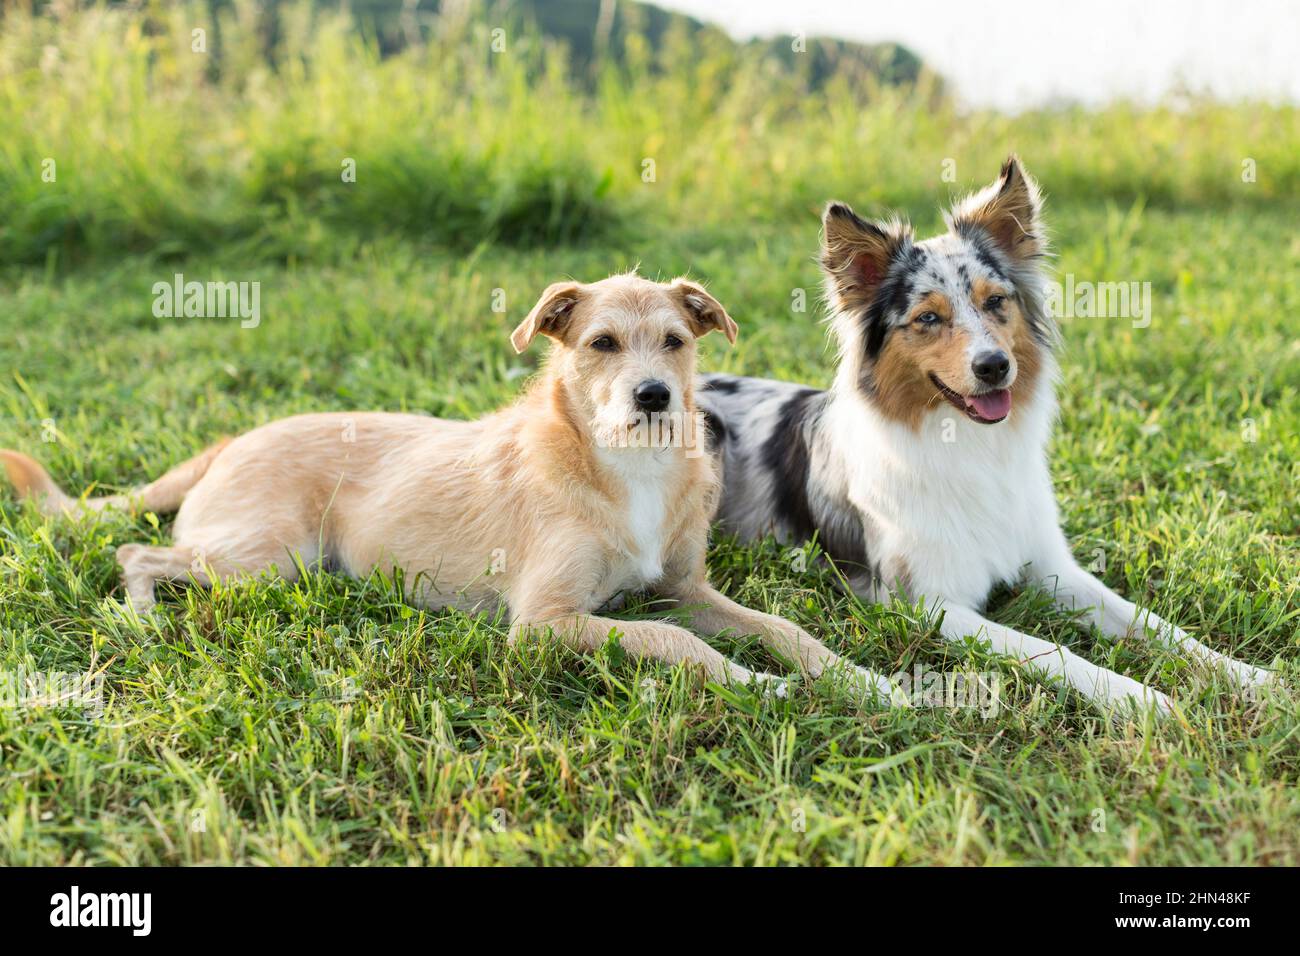 Adult Australian Shepherd and one mixed breed dog lying side by side in a meadow. Germany Stock Photo